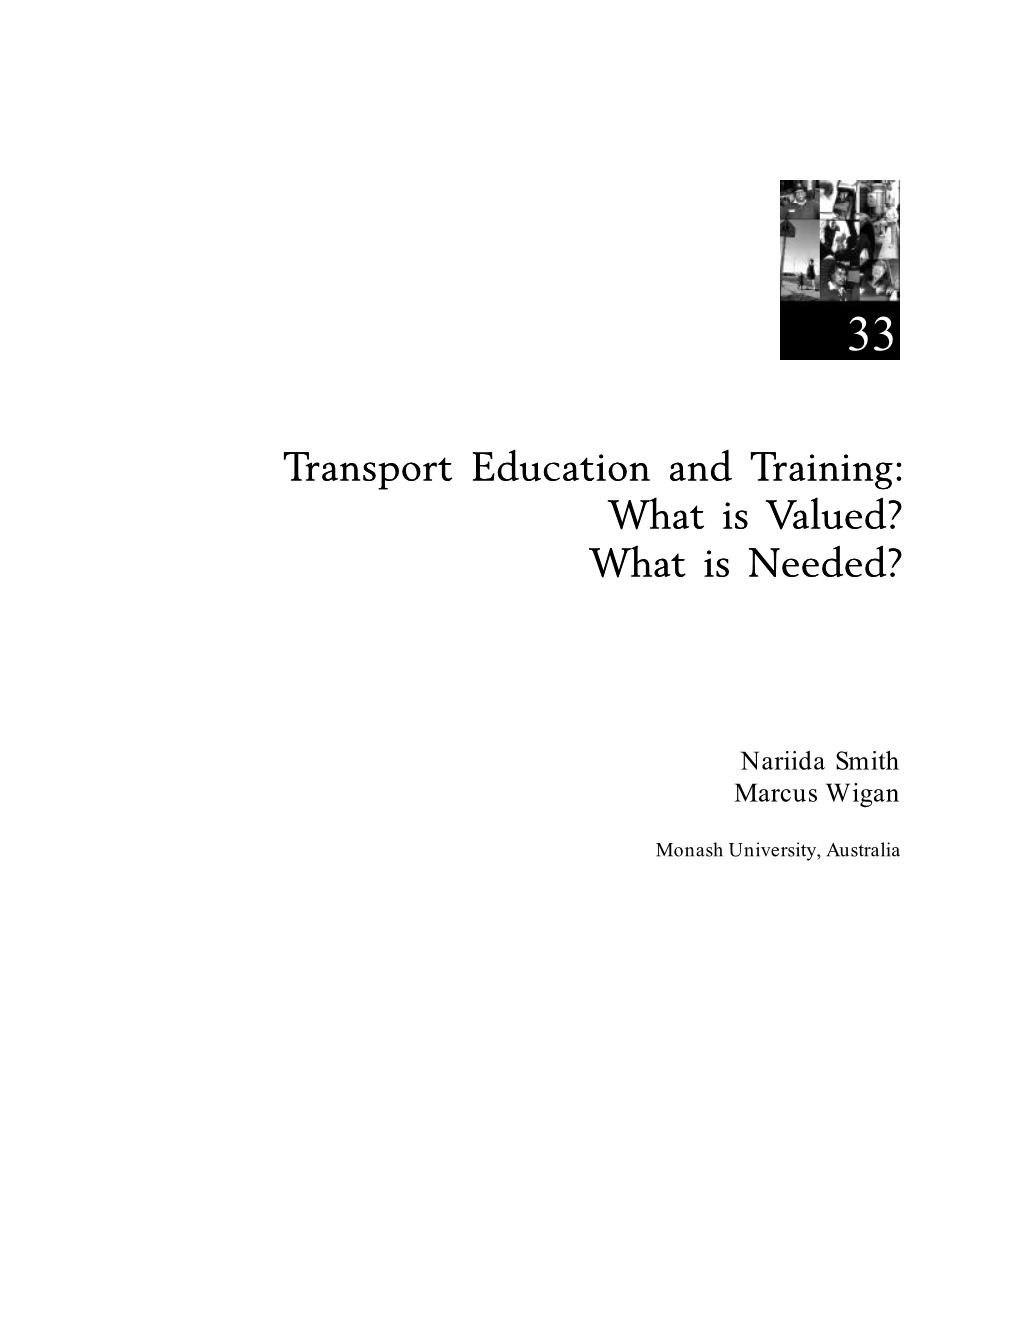 Transport Education and Training: What Is Valued? What Is Needed?